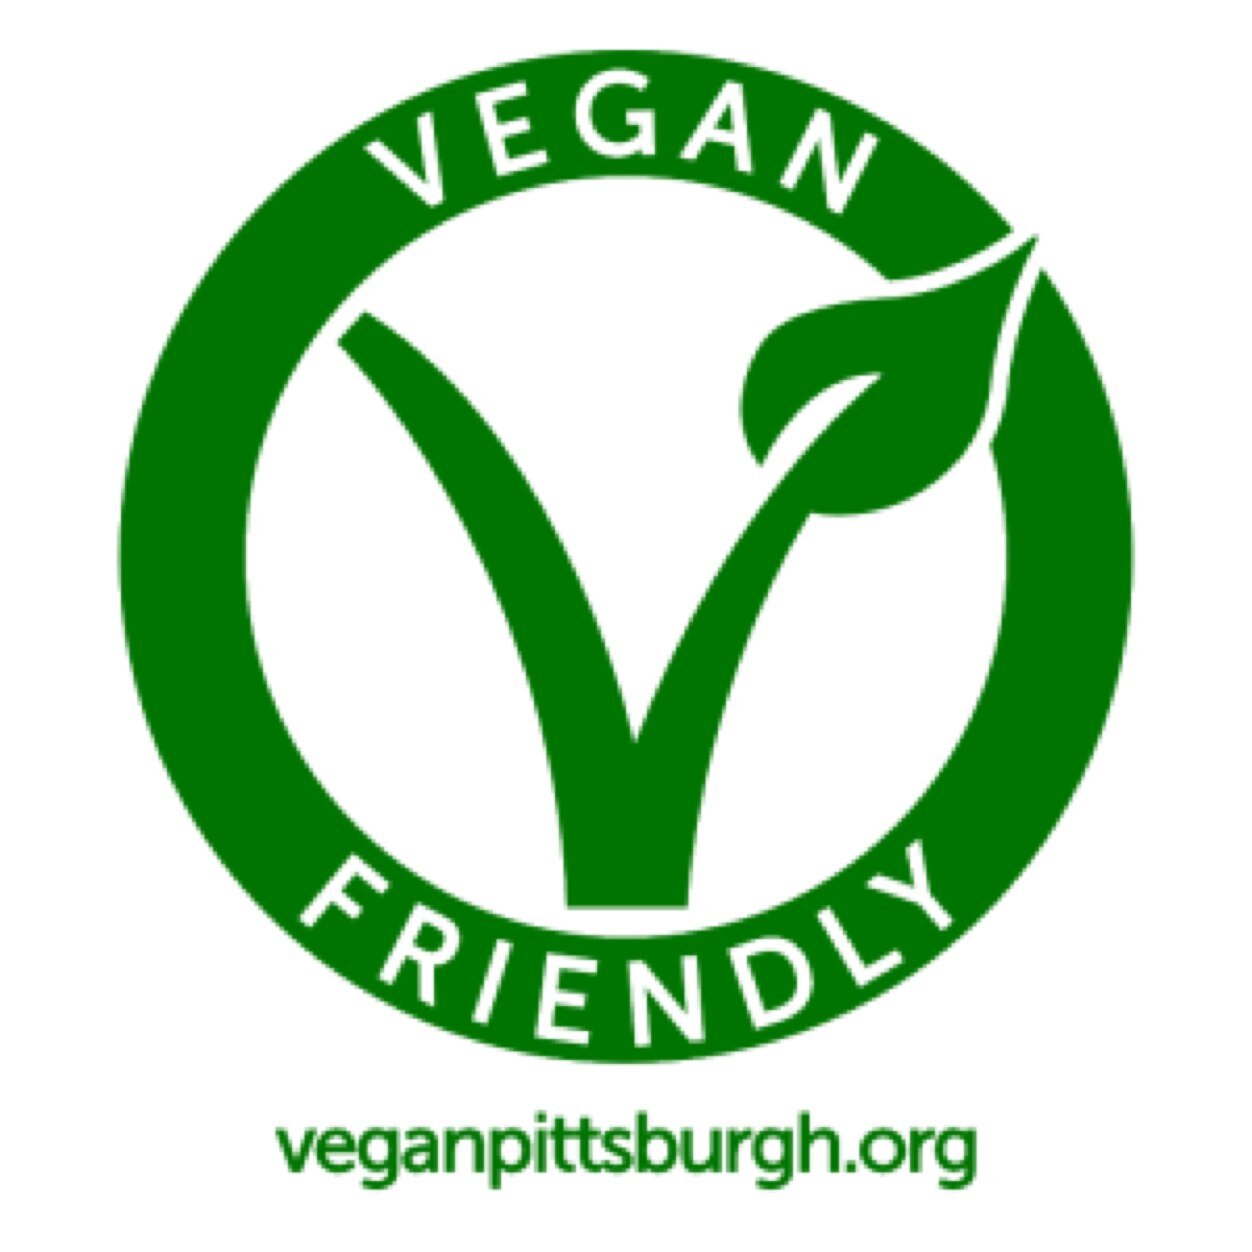 Increasing the visibility and accessibility of vegan dining options by developing collaborative relationships with business owners.